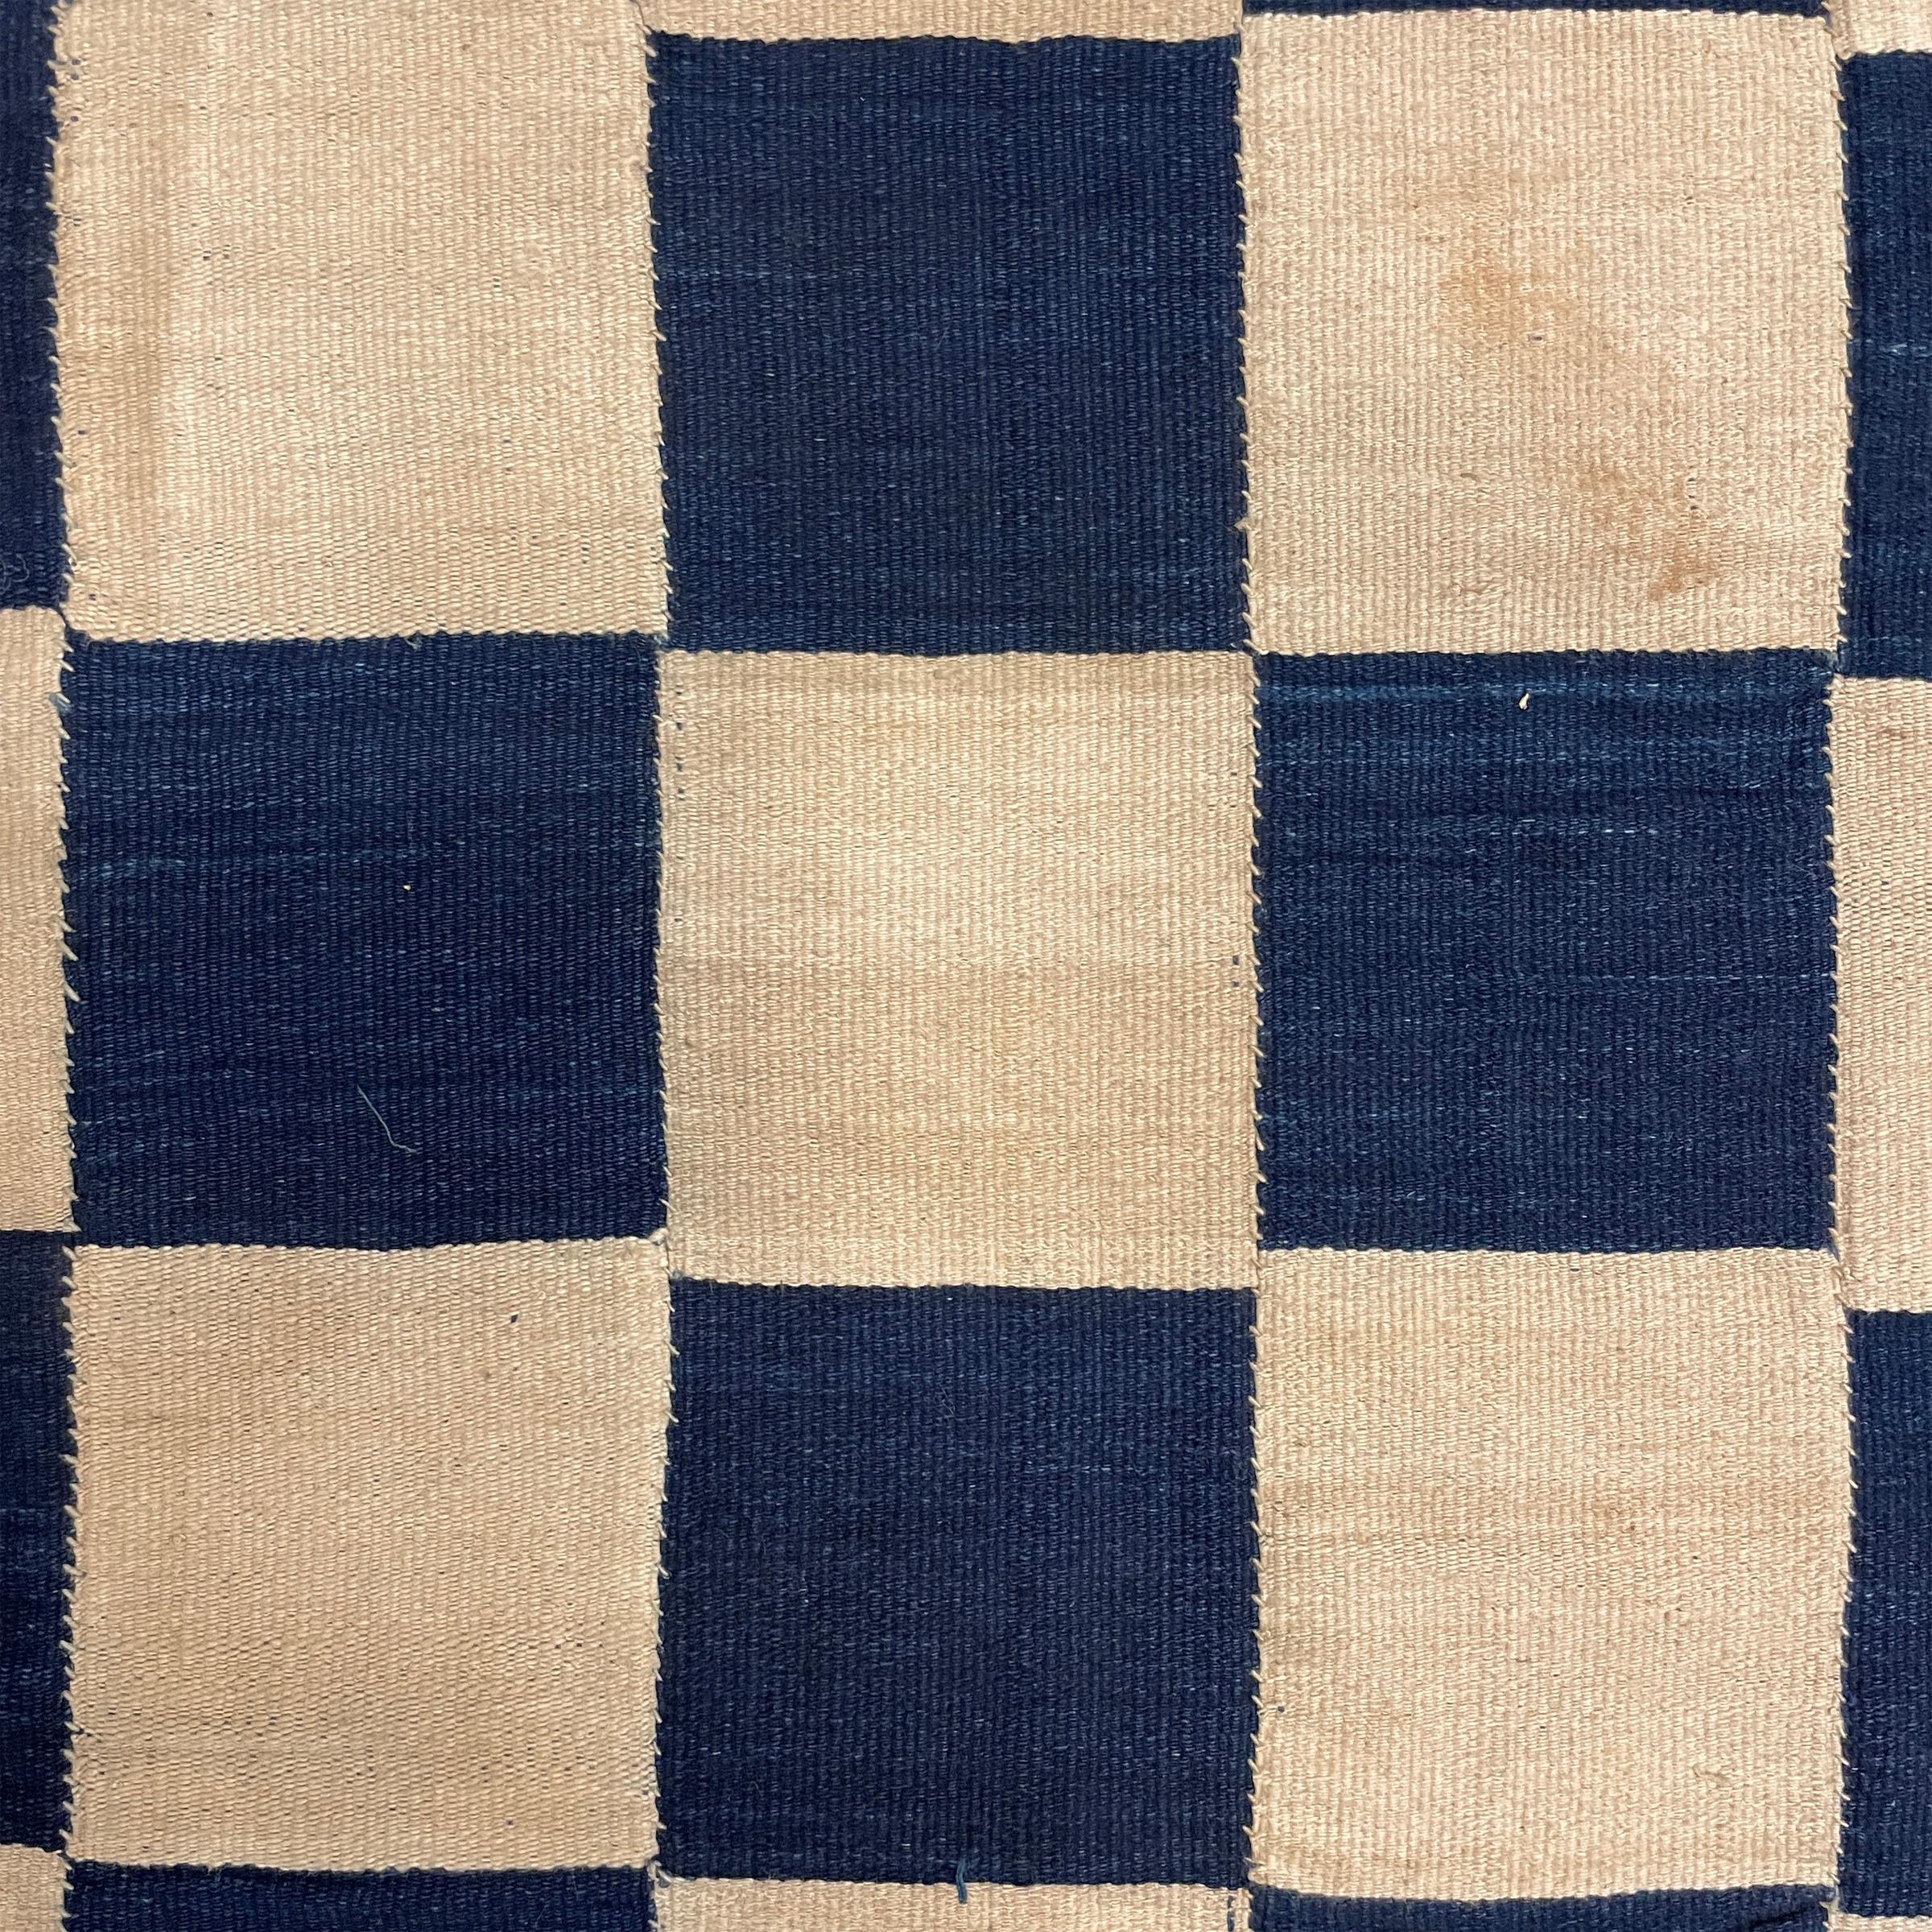 Mounted Early 20th Century Mende Country Cloth For Sale 2